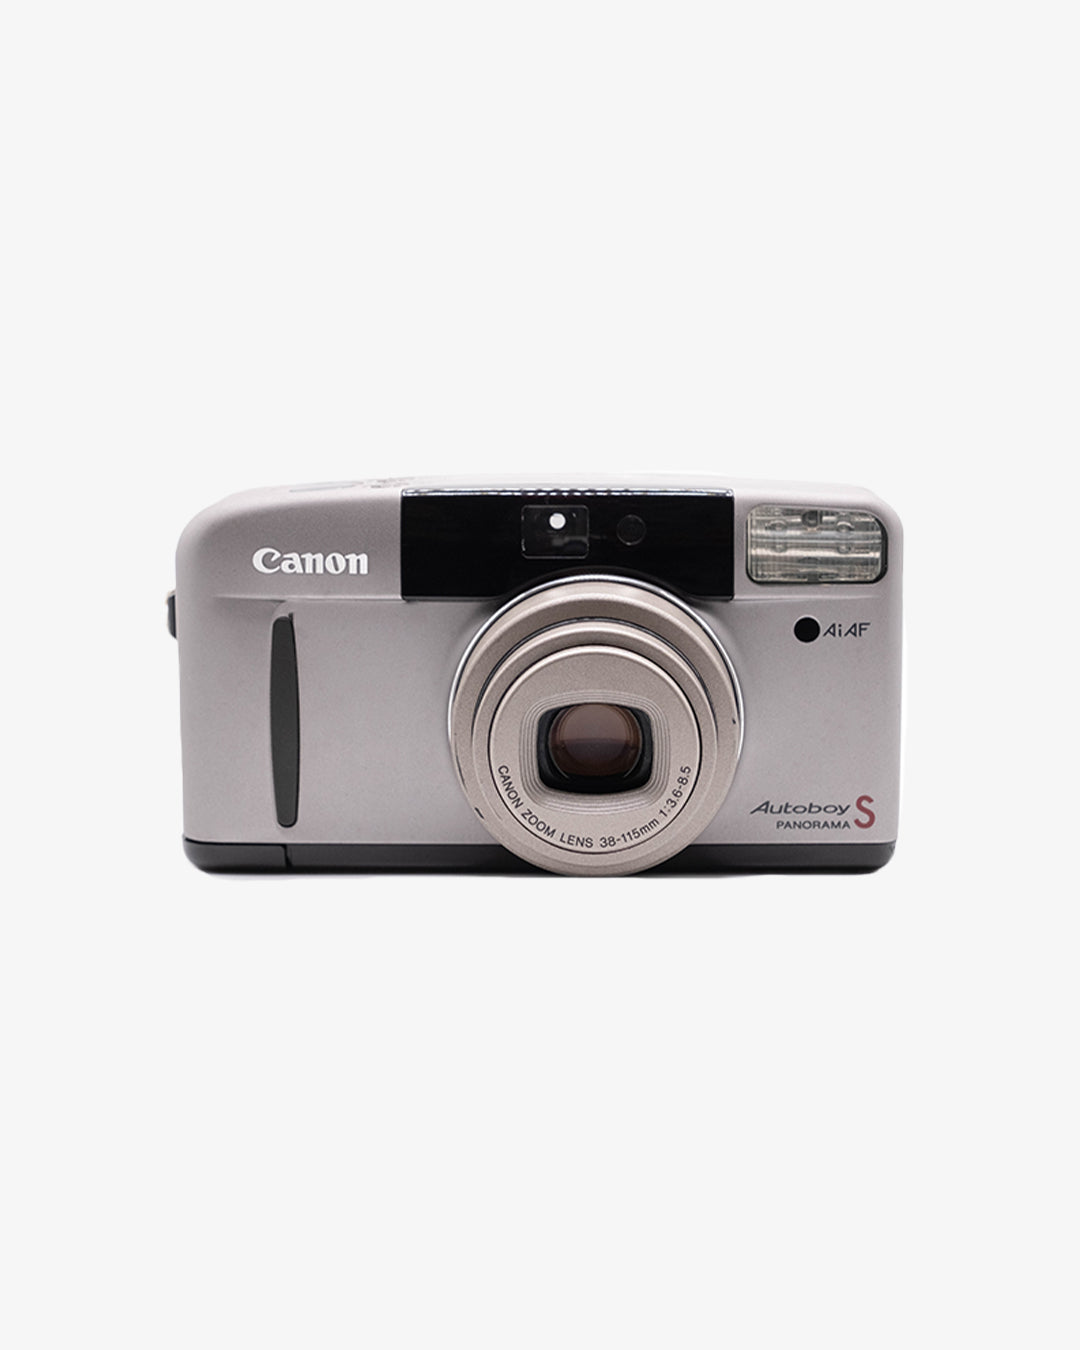 Canon Autoboy S Panorama Point & Shoot Camera with 38-115mm lens